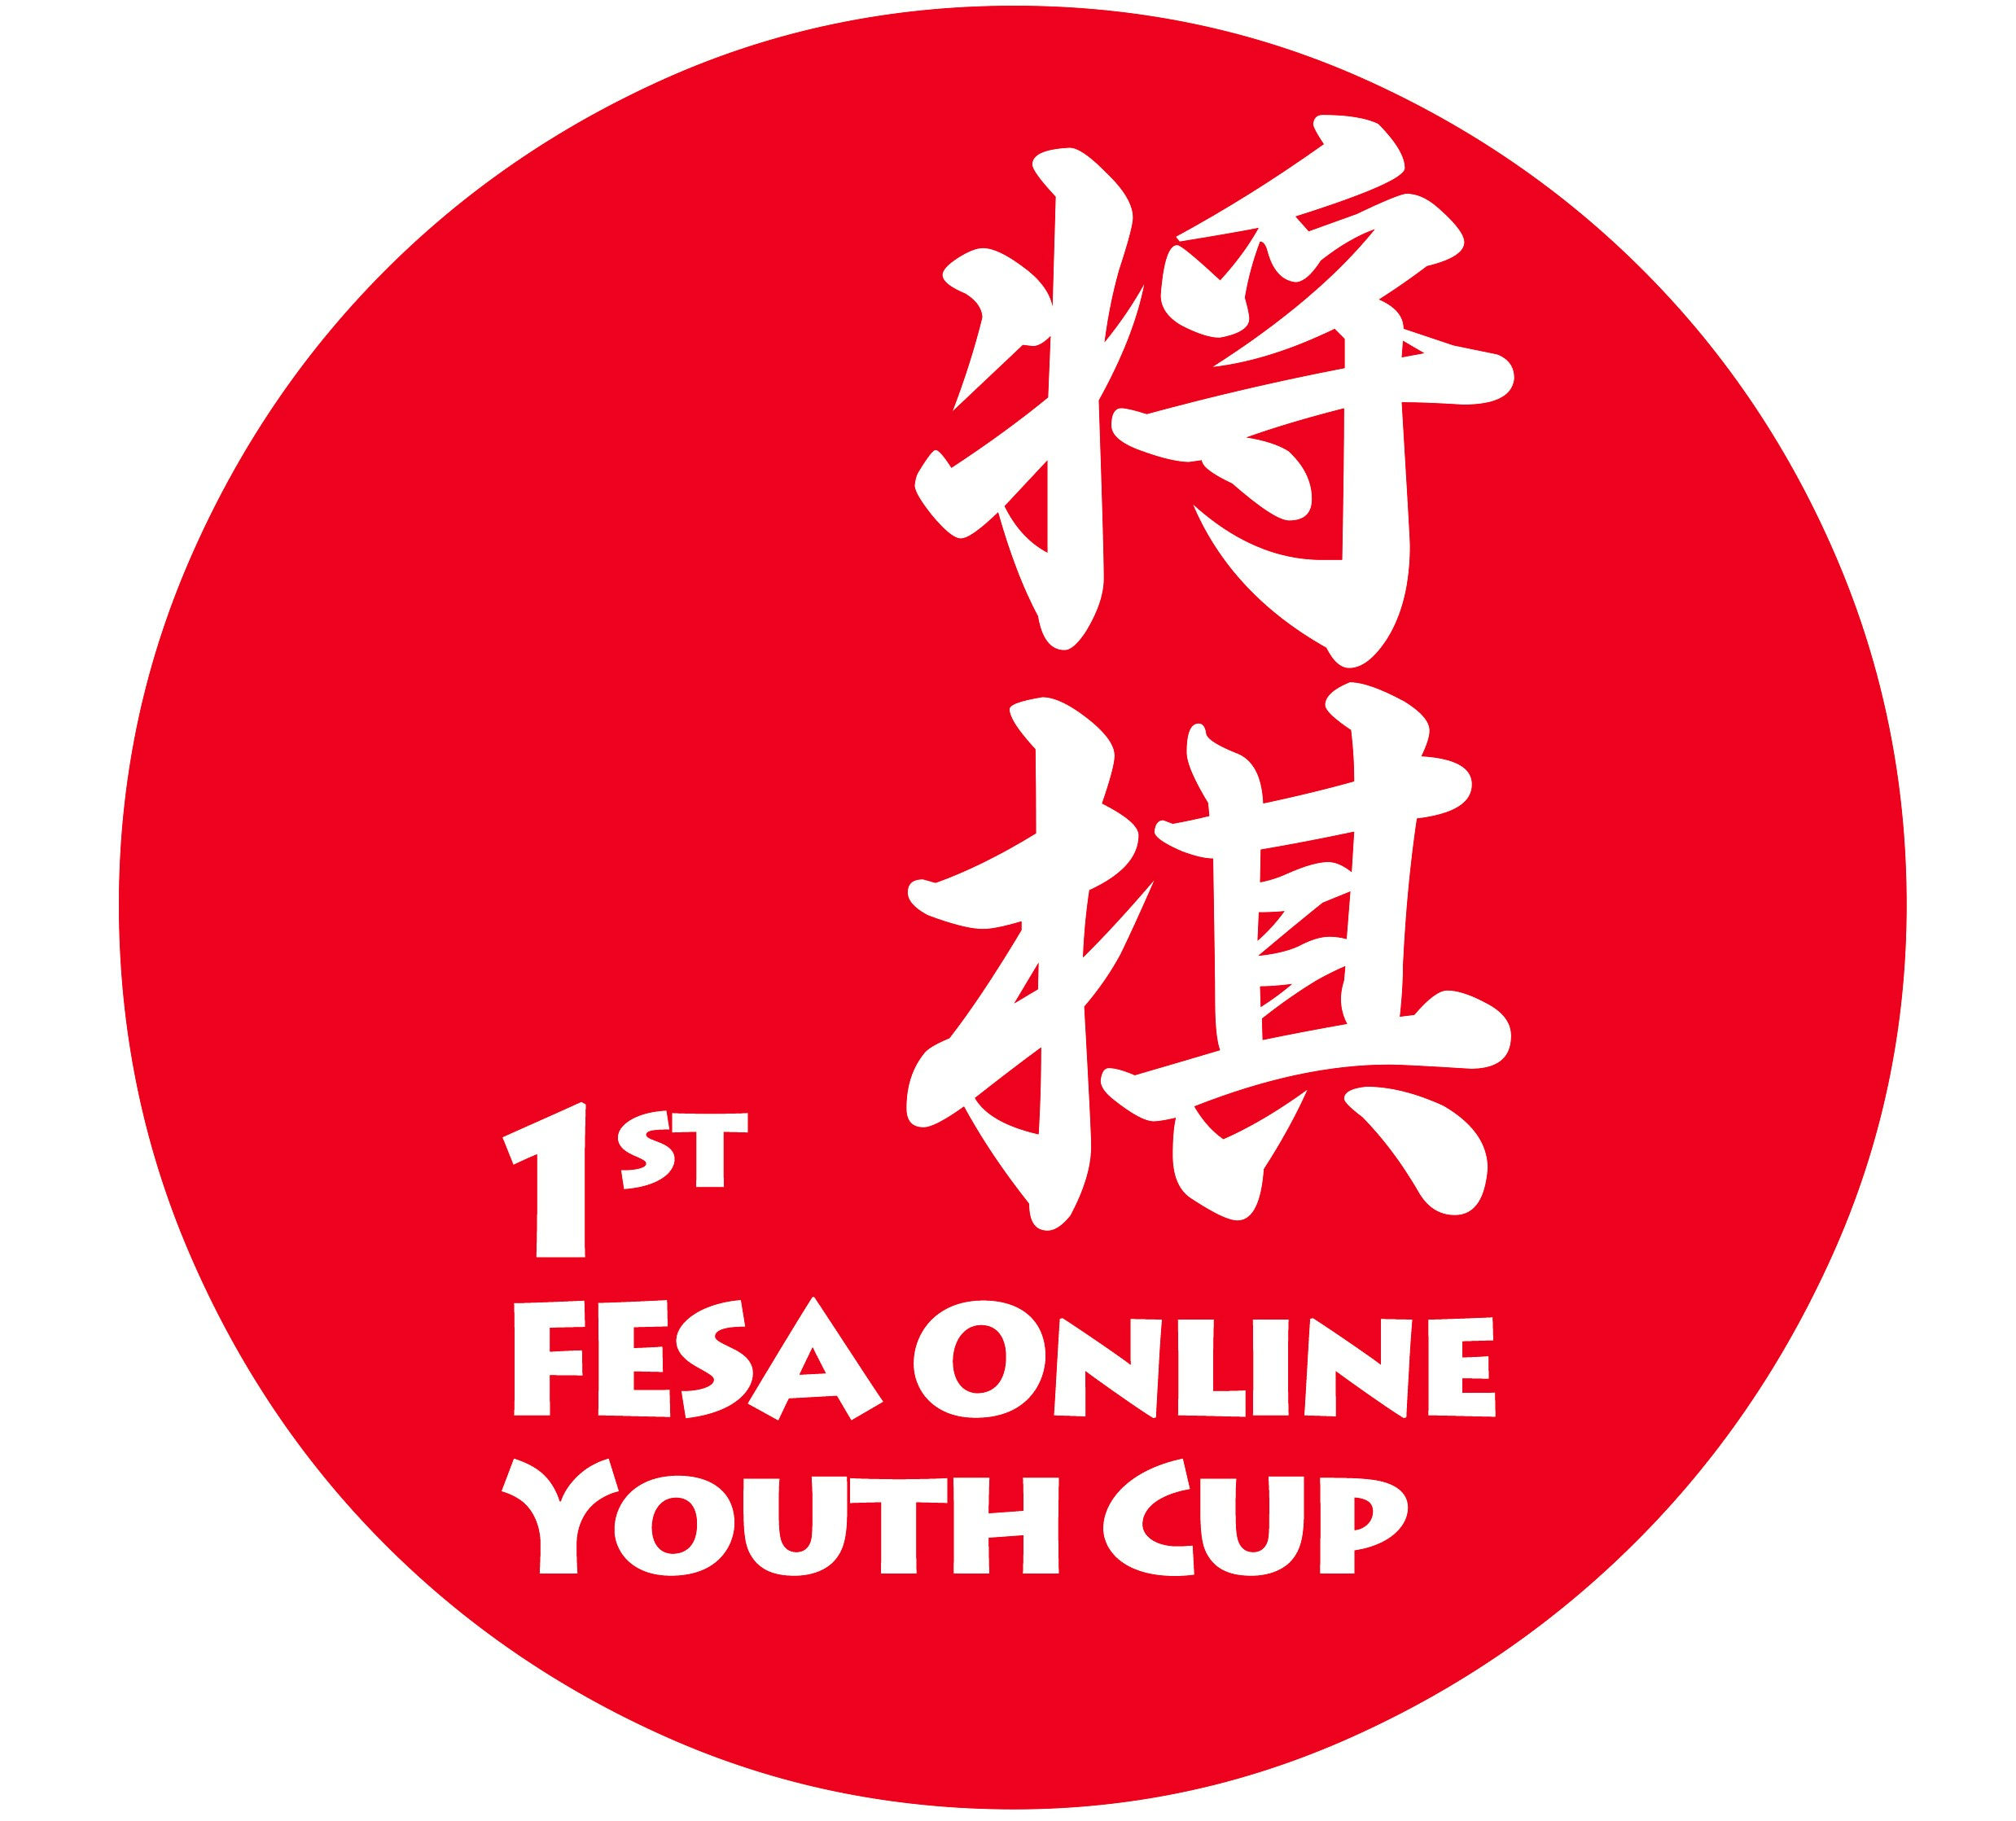 1st FESA ONLINE YOUTH CUP